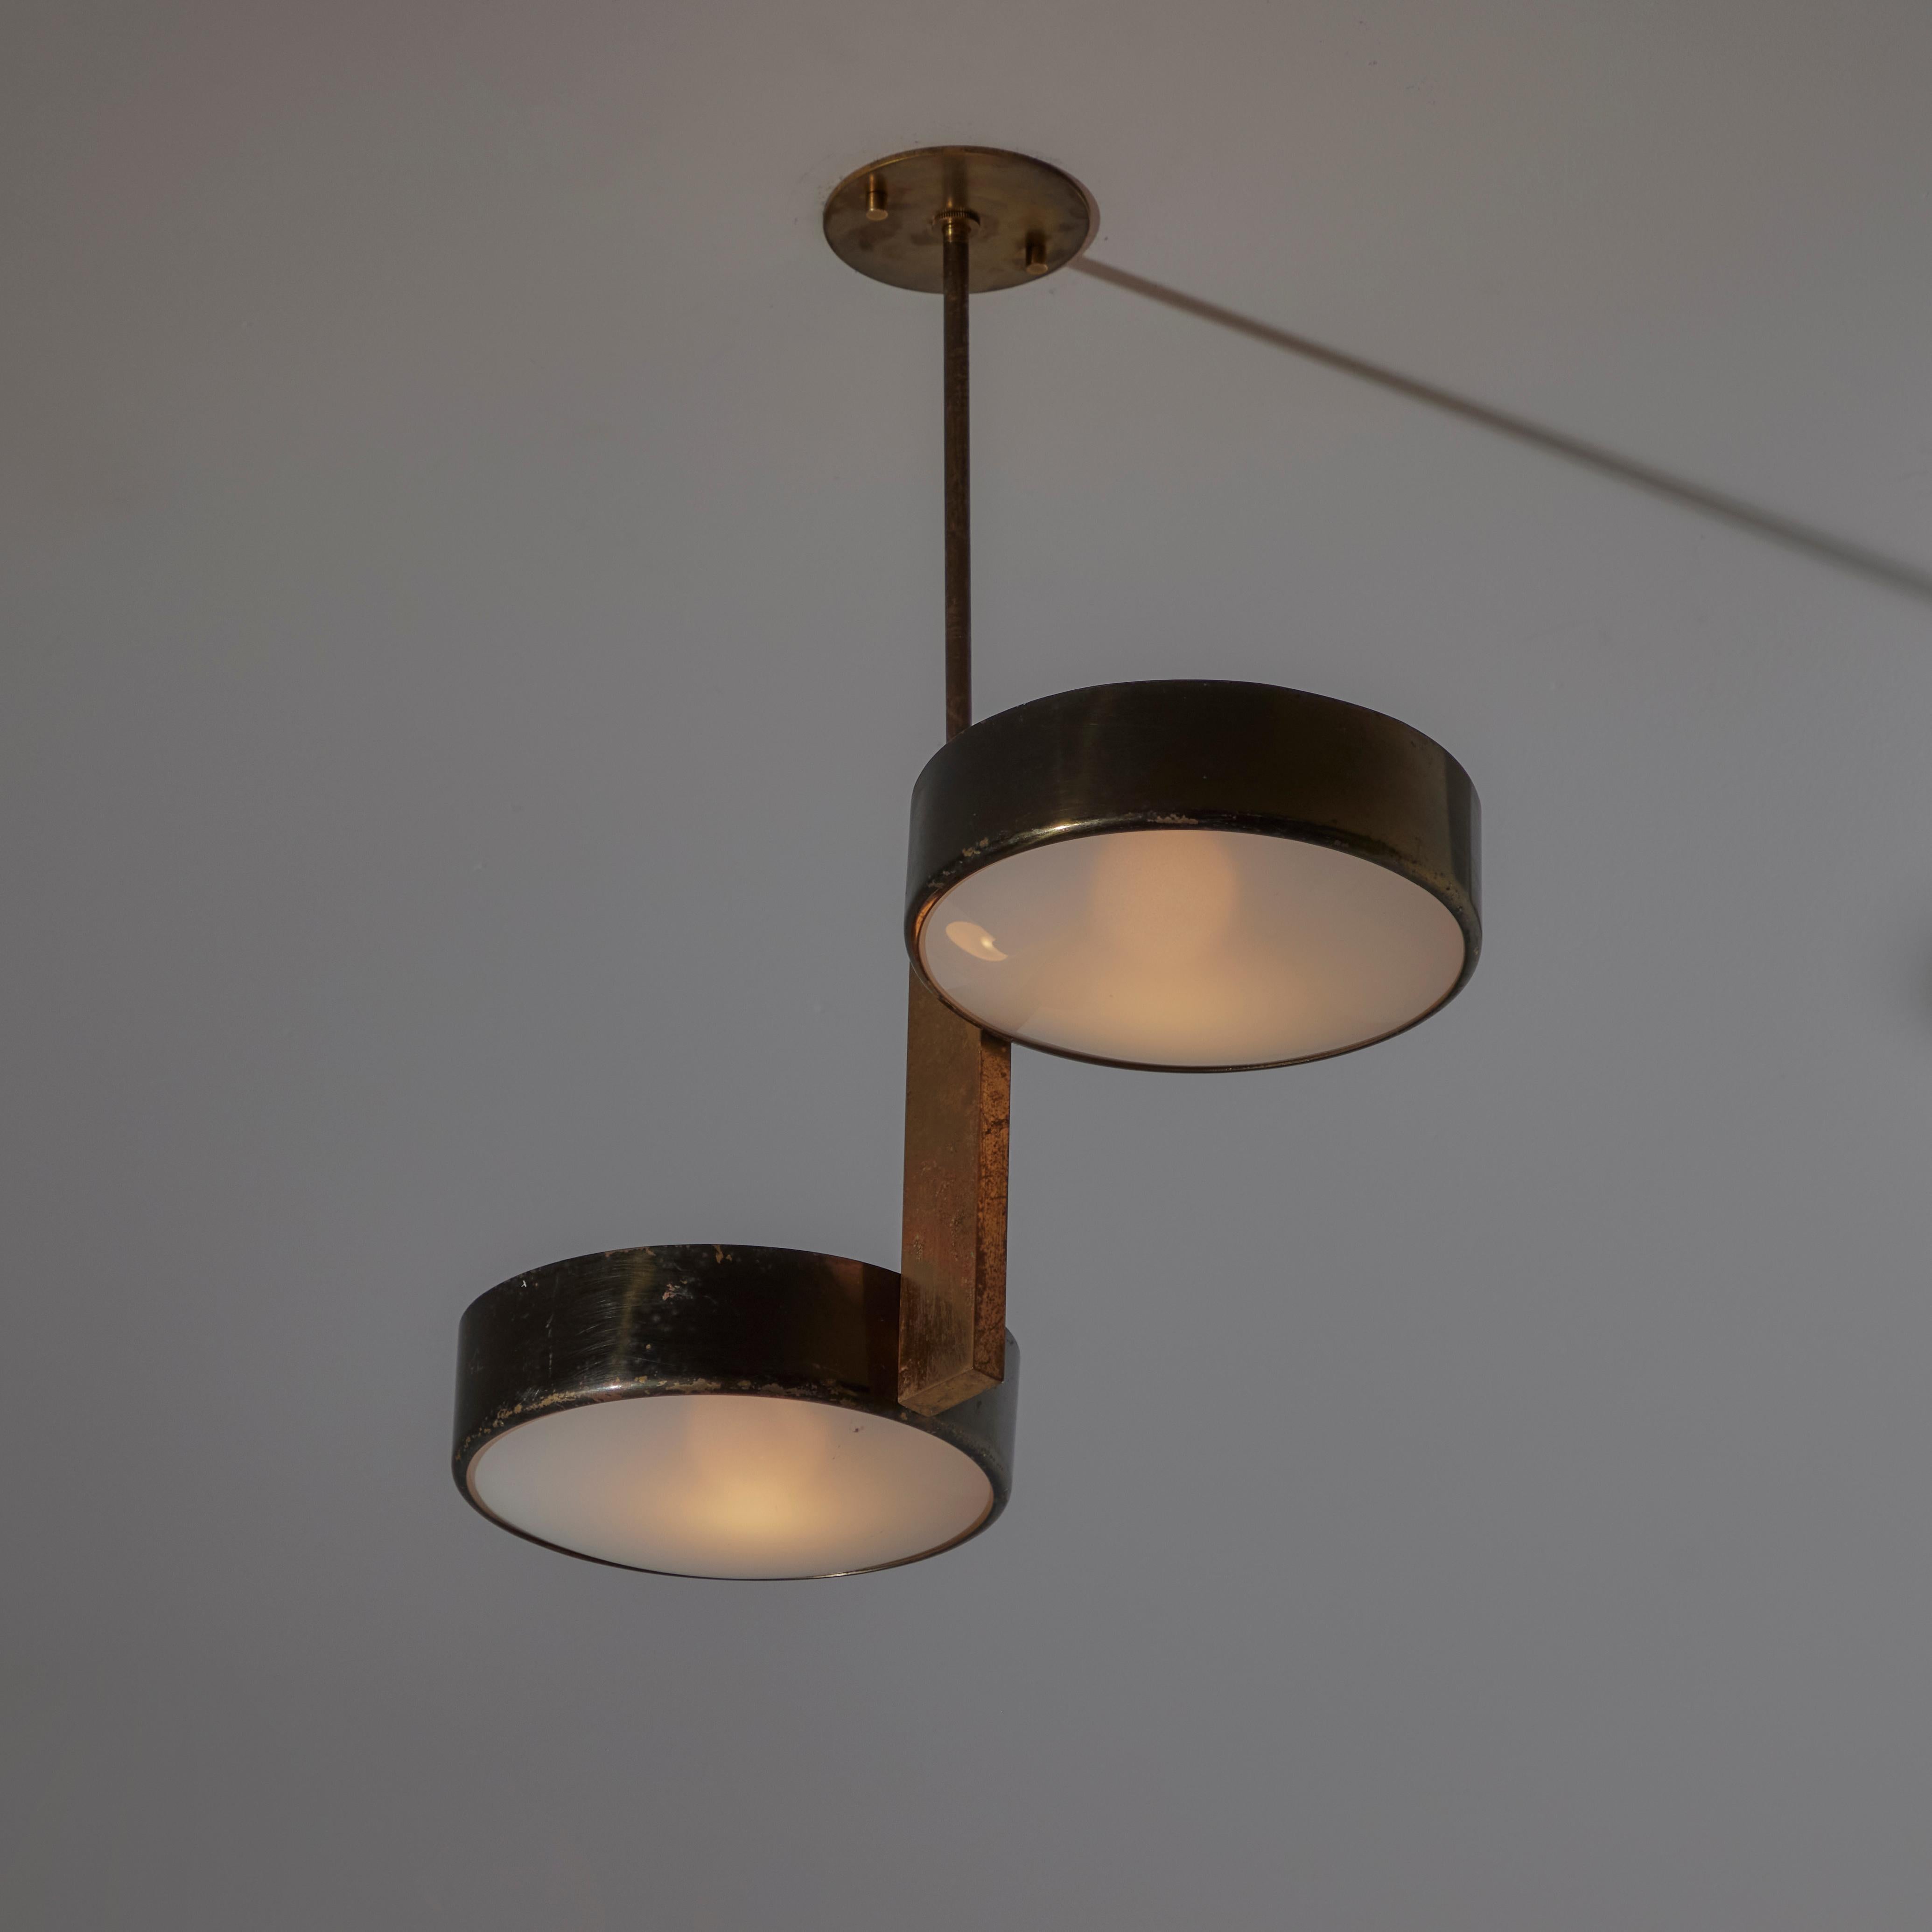 Ceiling light by Stilnovo. Designed and manufactured in Italy, circa the 1950s. Double-tiered black enameled shade holders are offset on a brass pendant stem. The diffusers are made of etched glass. Each diffuser holds an E27 socket type, adapted